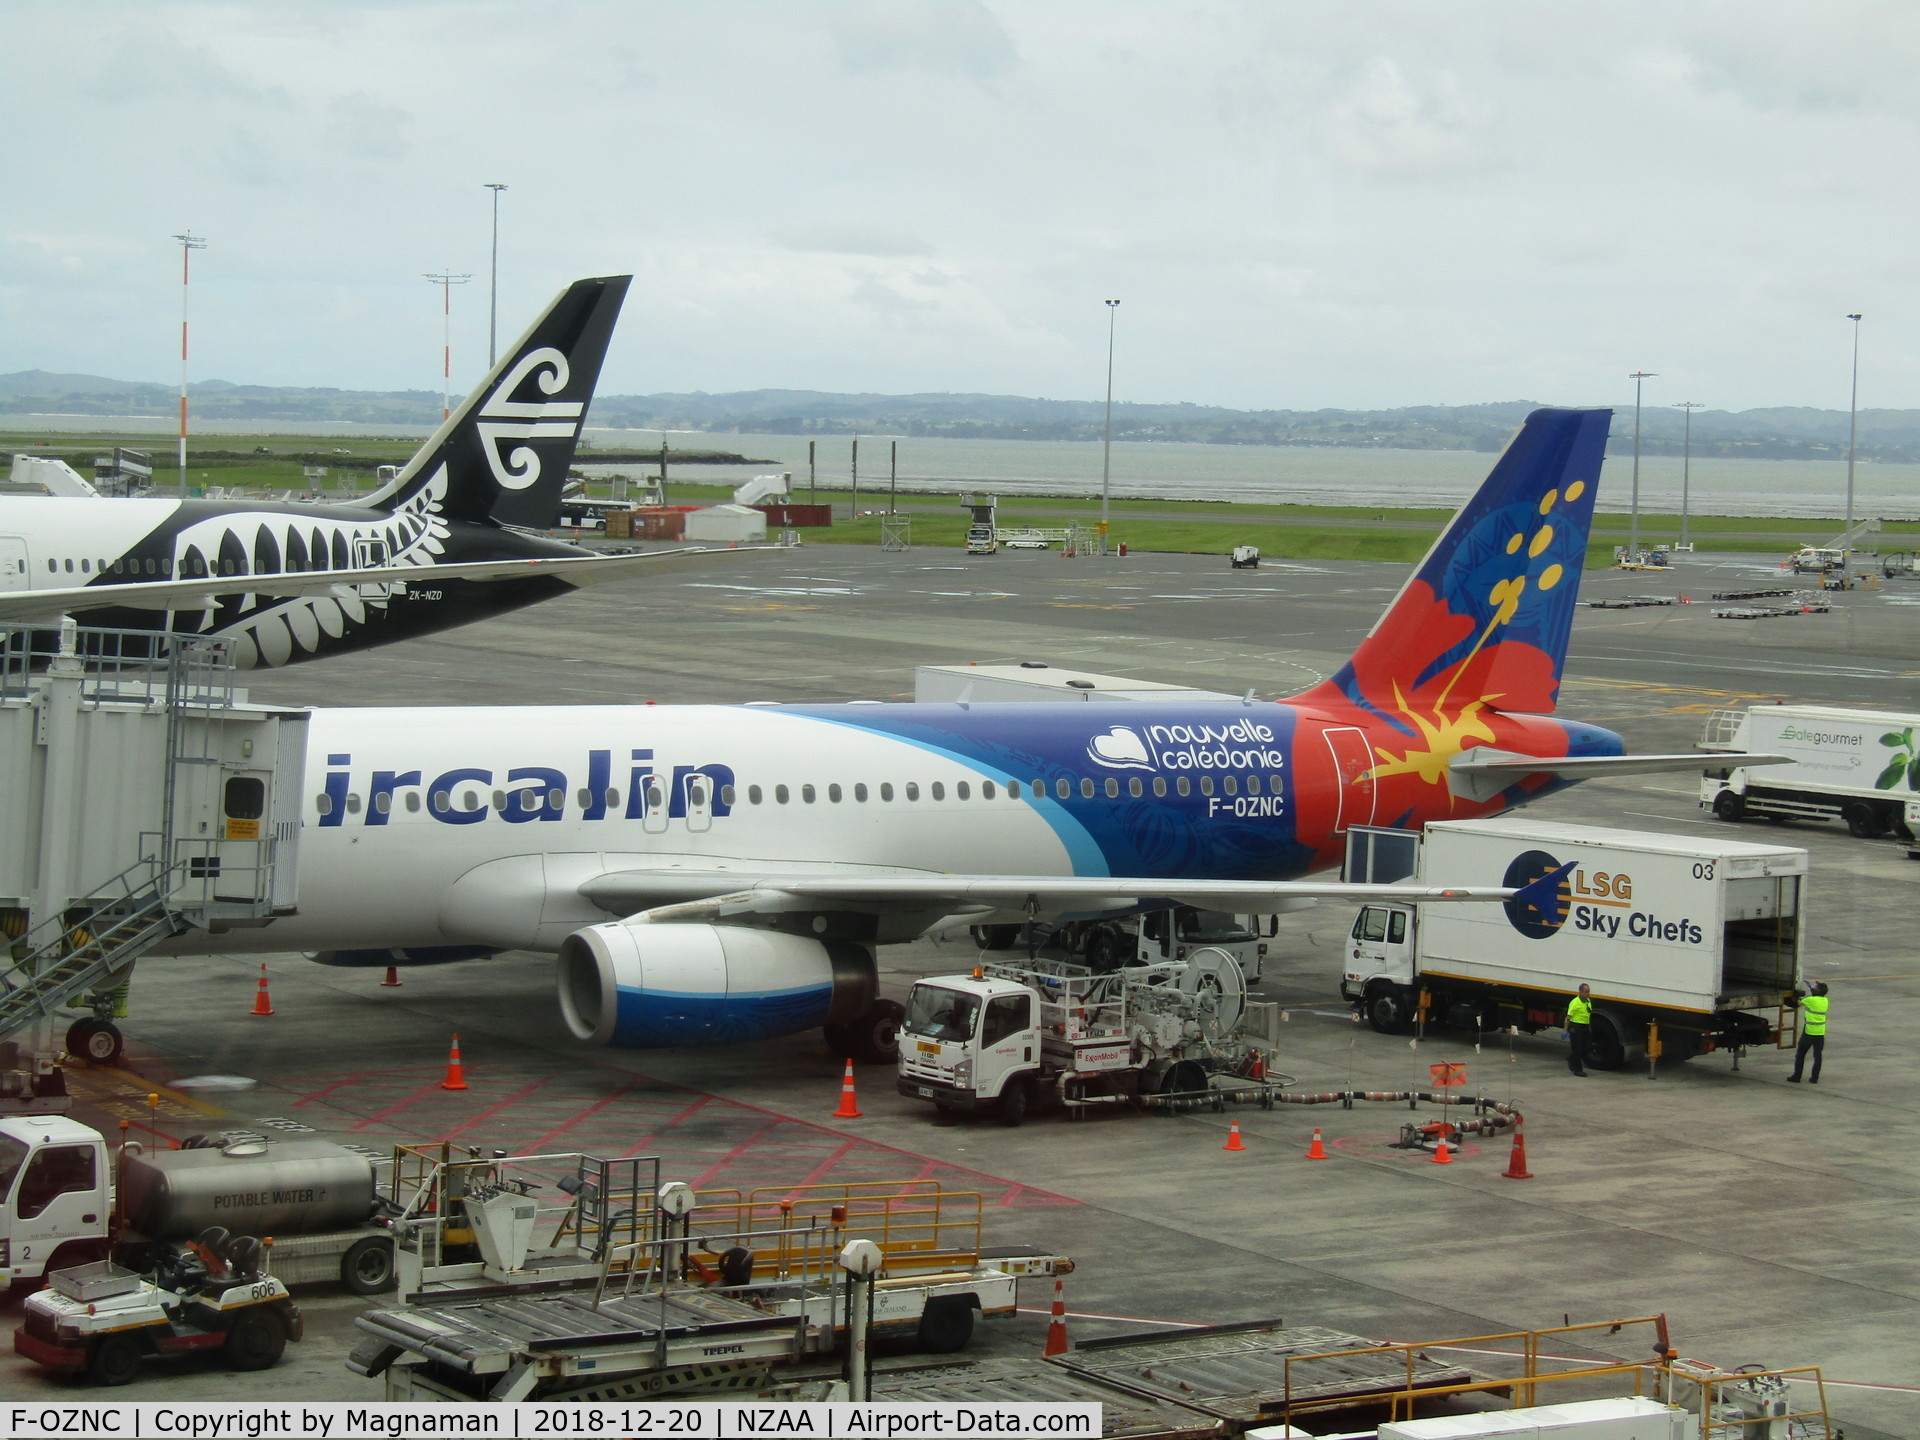 F-OZNC, 2008 Airbus A320-232 C/N 3547, ON stand at AKL